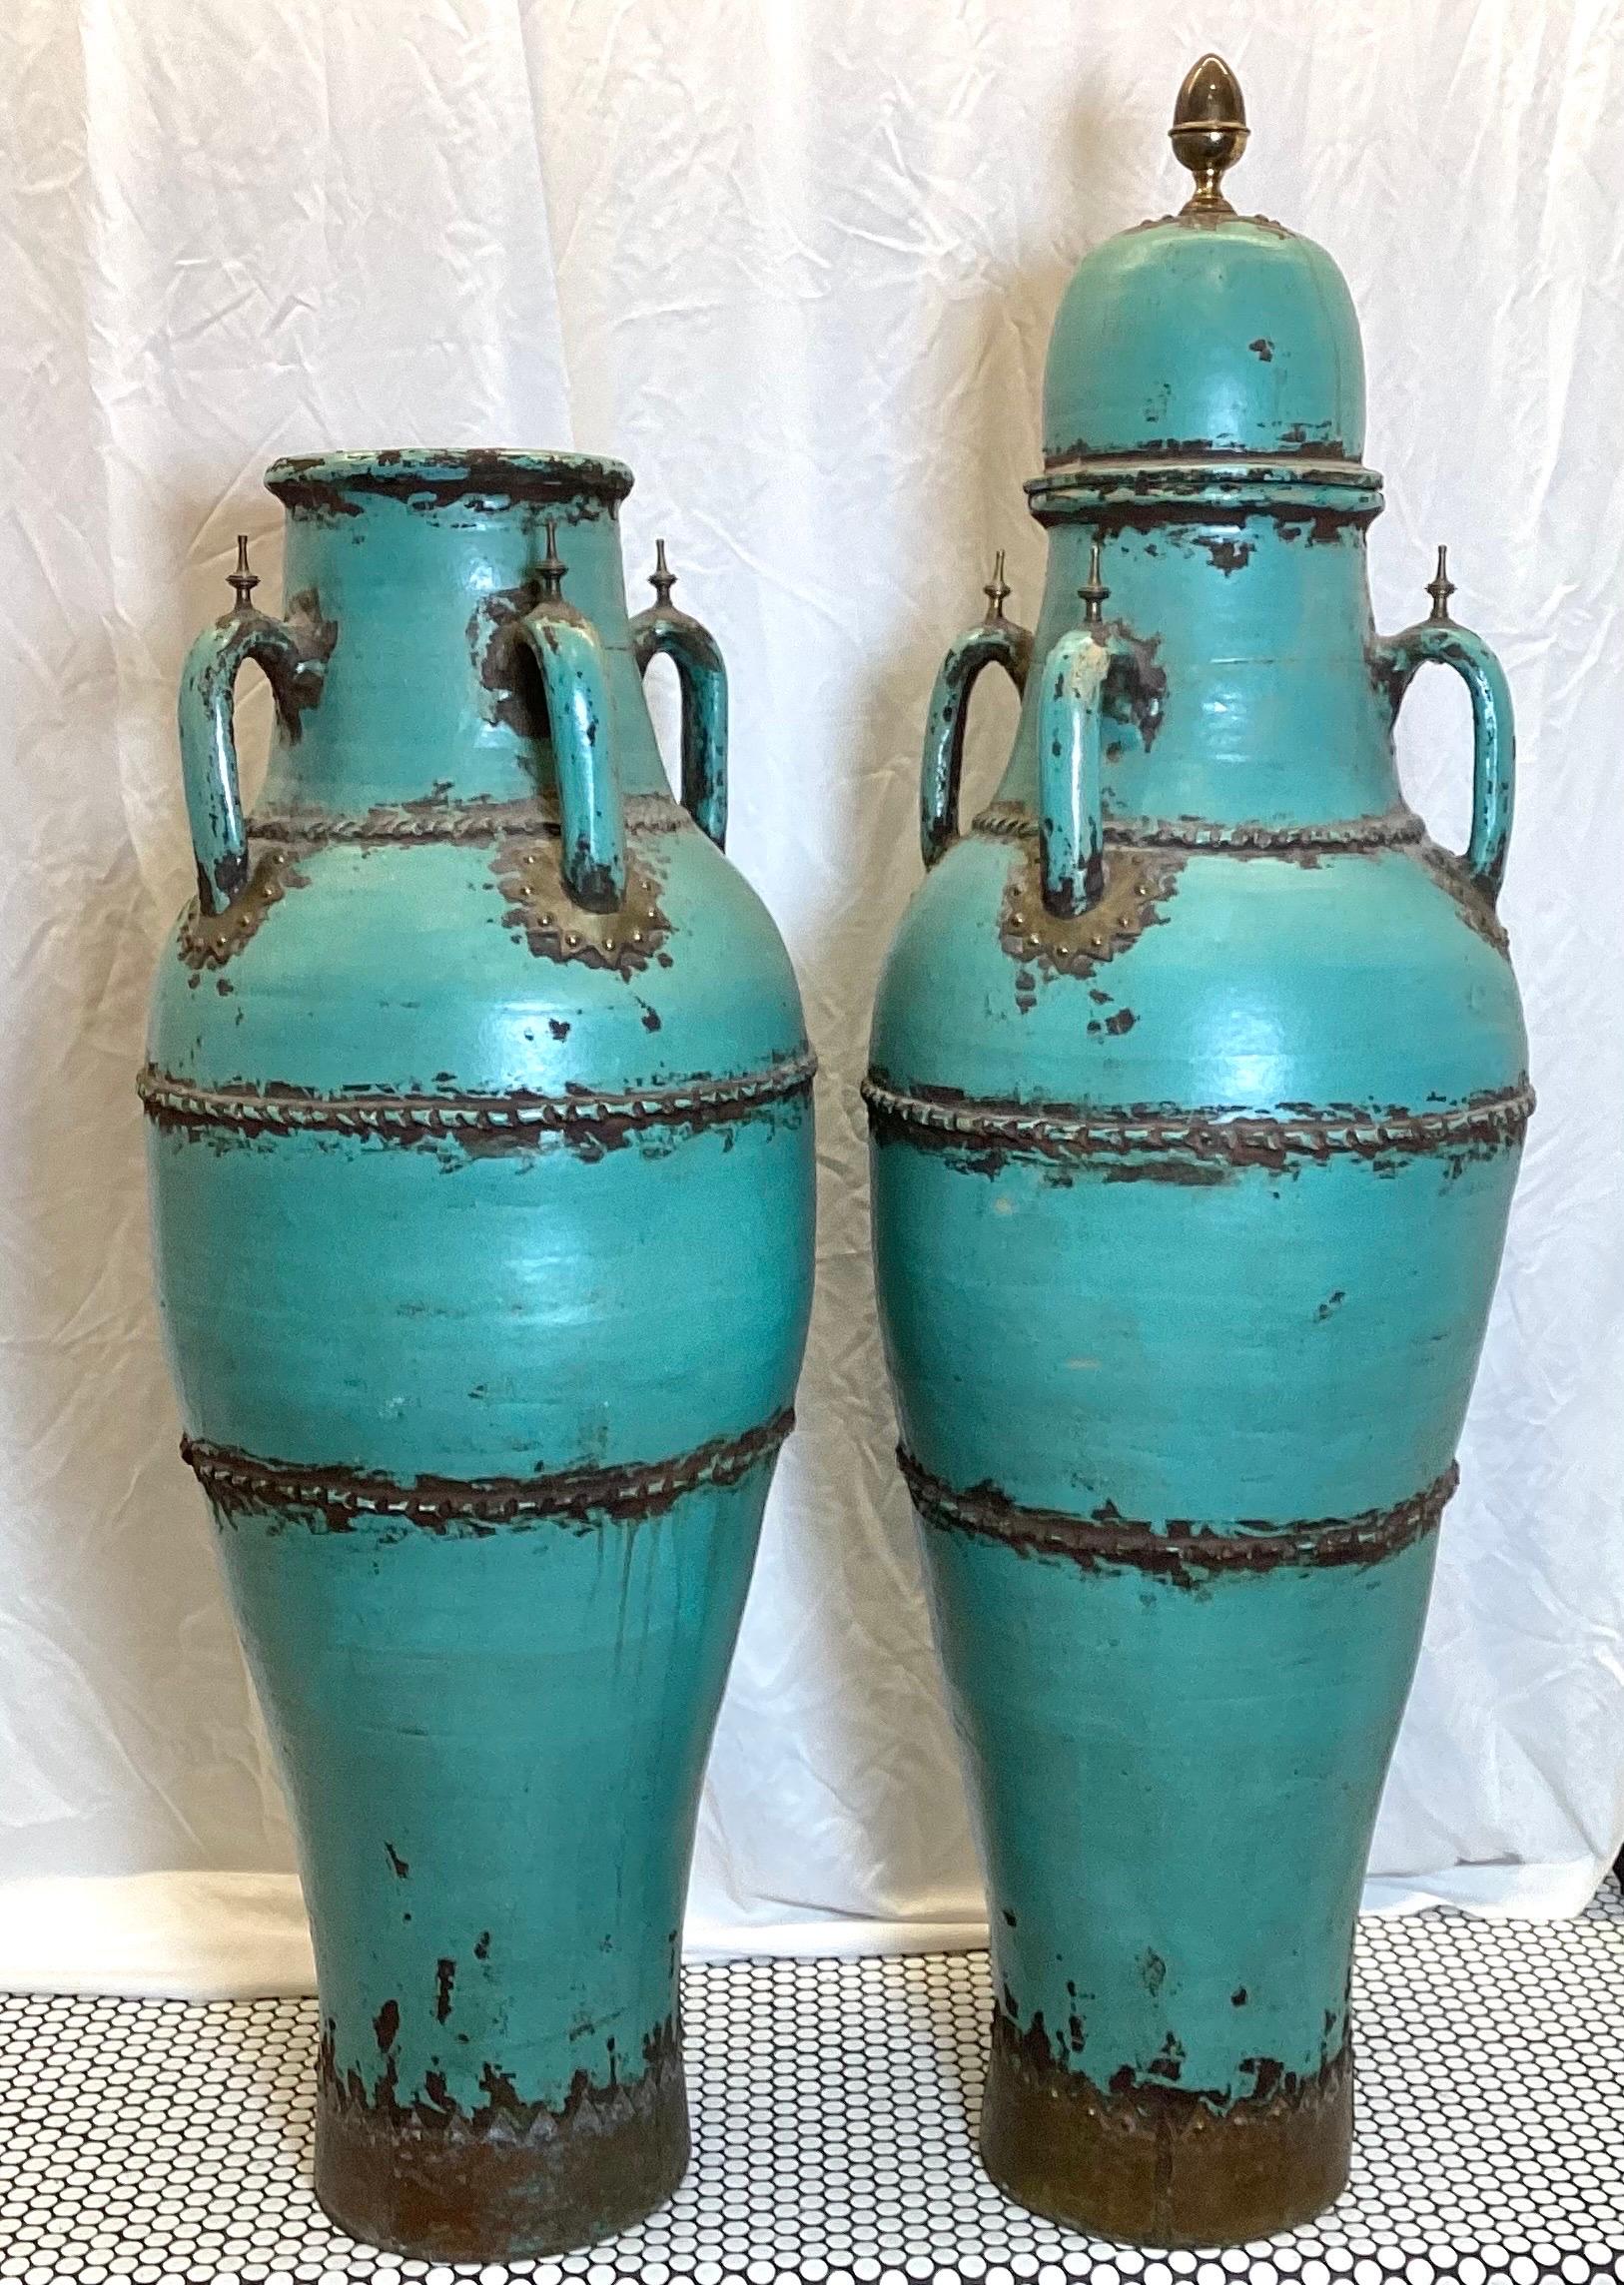 A Pair of Monumental Four Handled Tall Pottery Urns For Sale 4